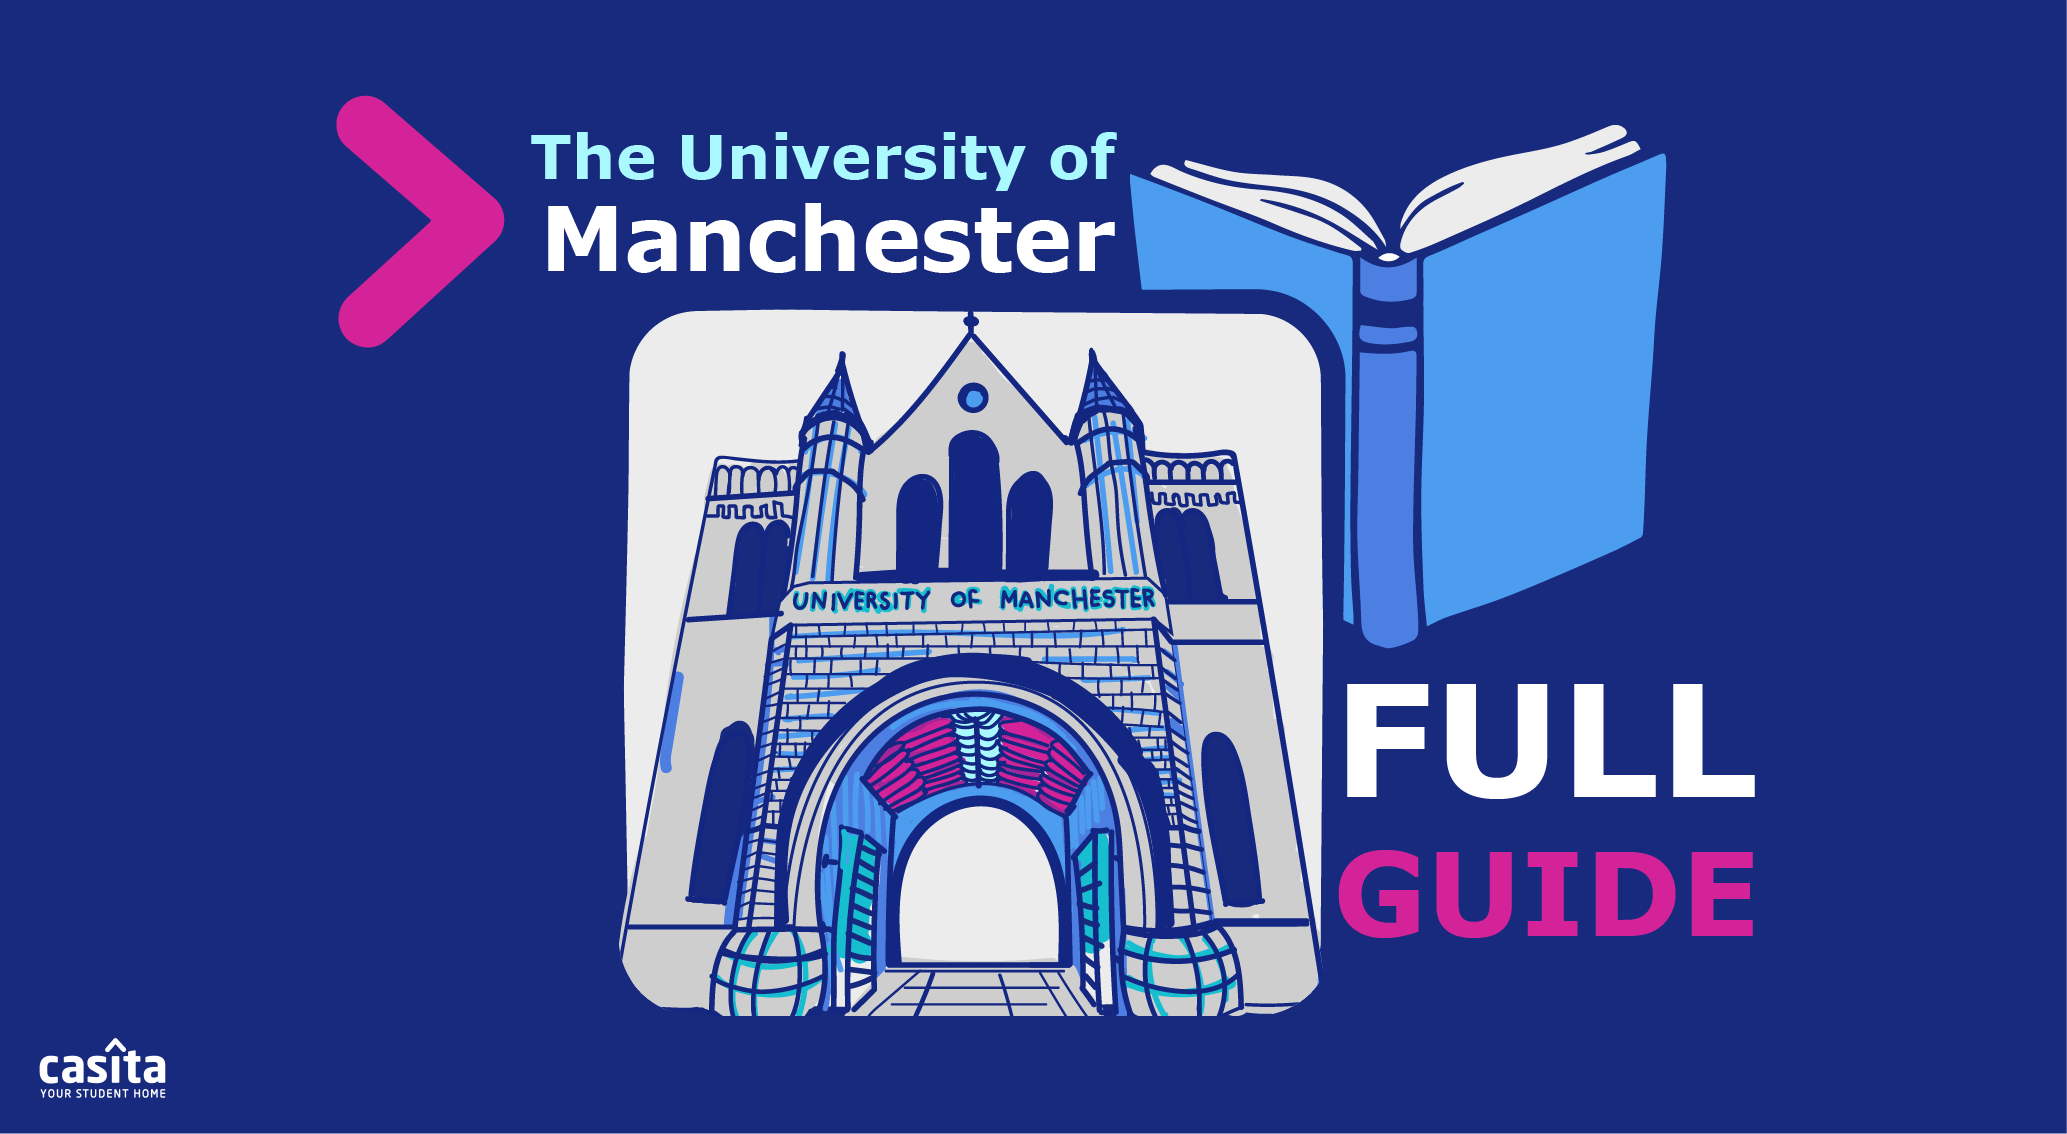 A Full Guide to the University of Manchester